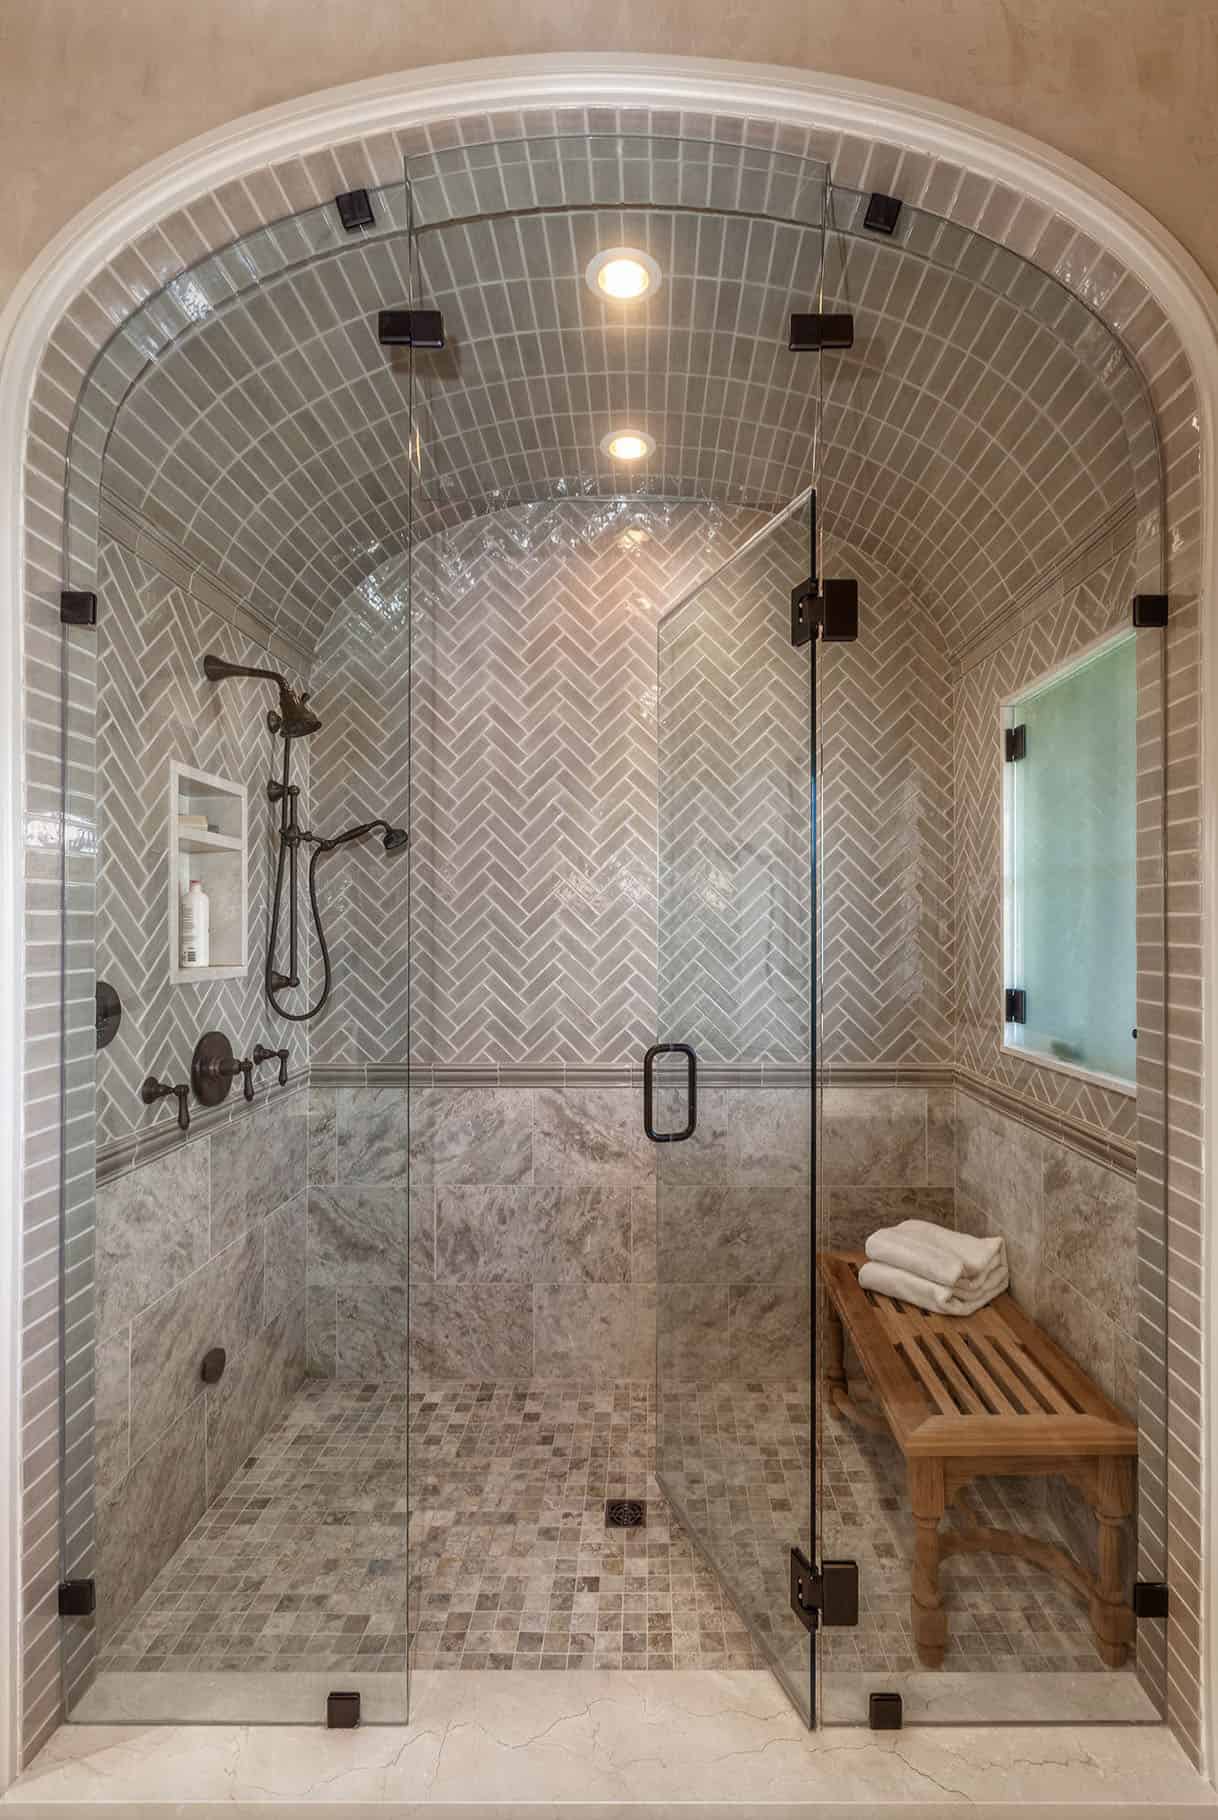 Above: The subway tile is from Walker Zanger in the Gramercy Park series an...